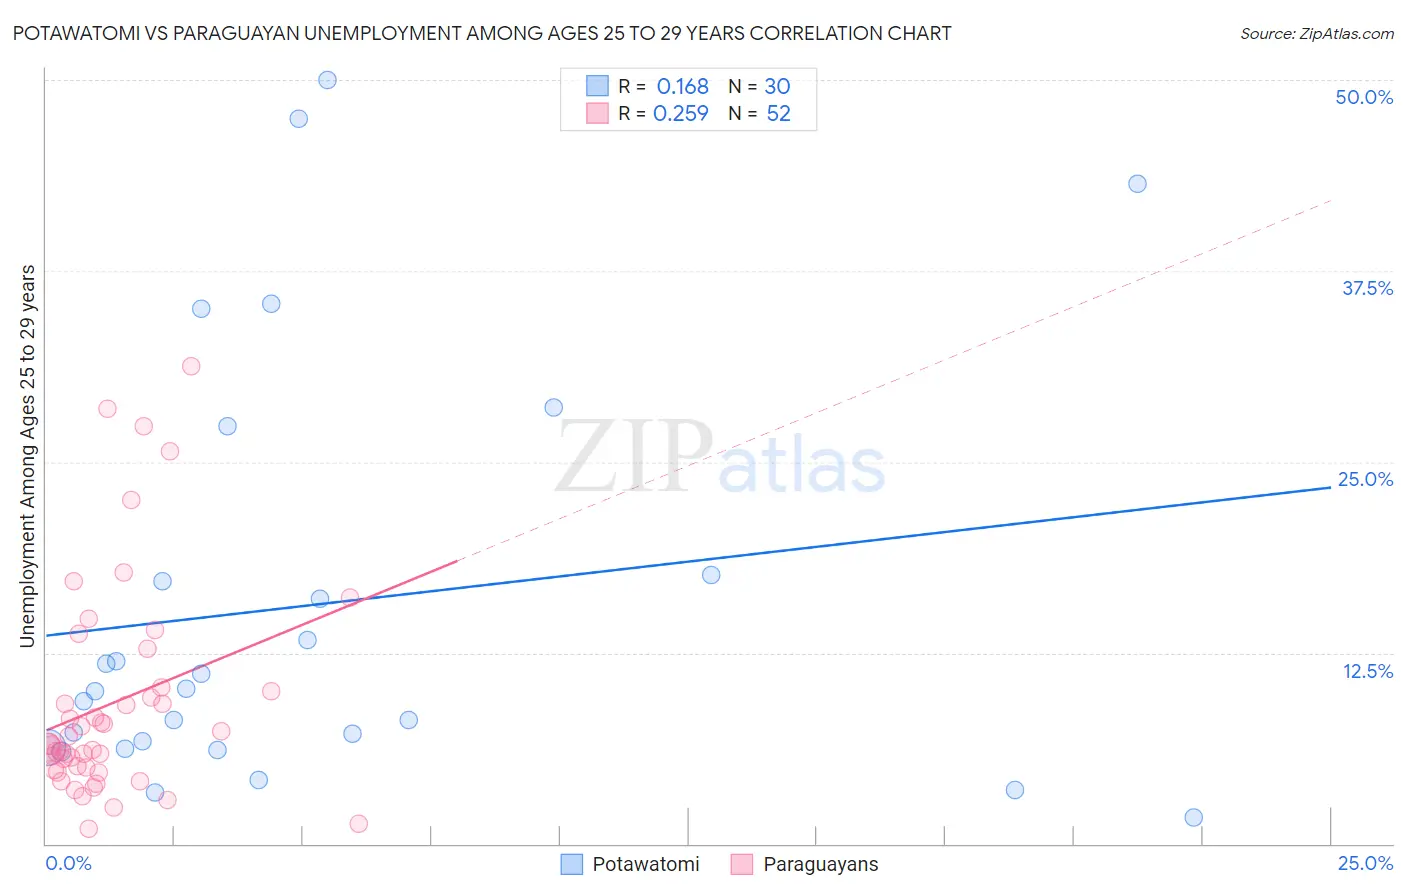 Potawatomi vs Paraguayan Unemployment Among Ages 25 to 29 years